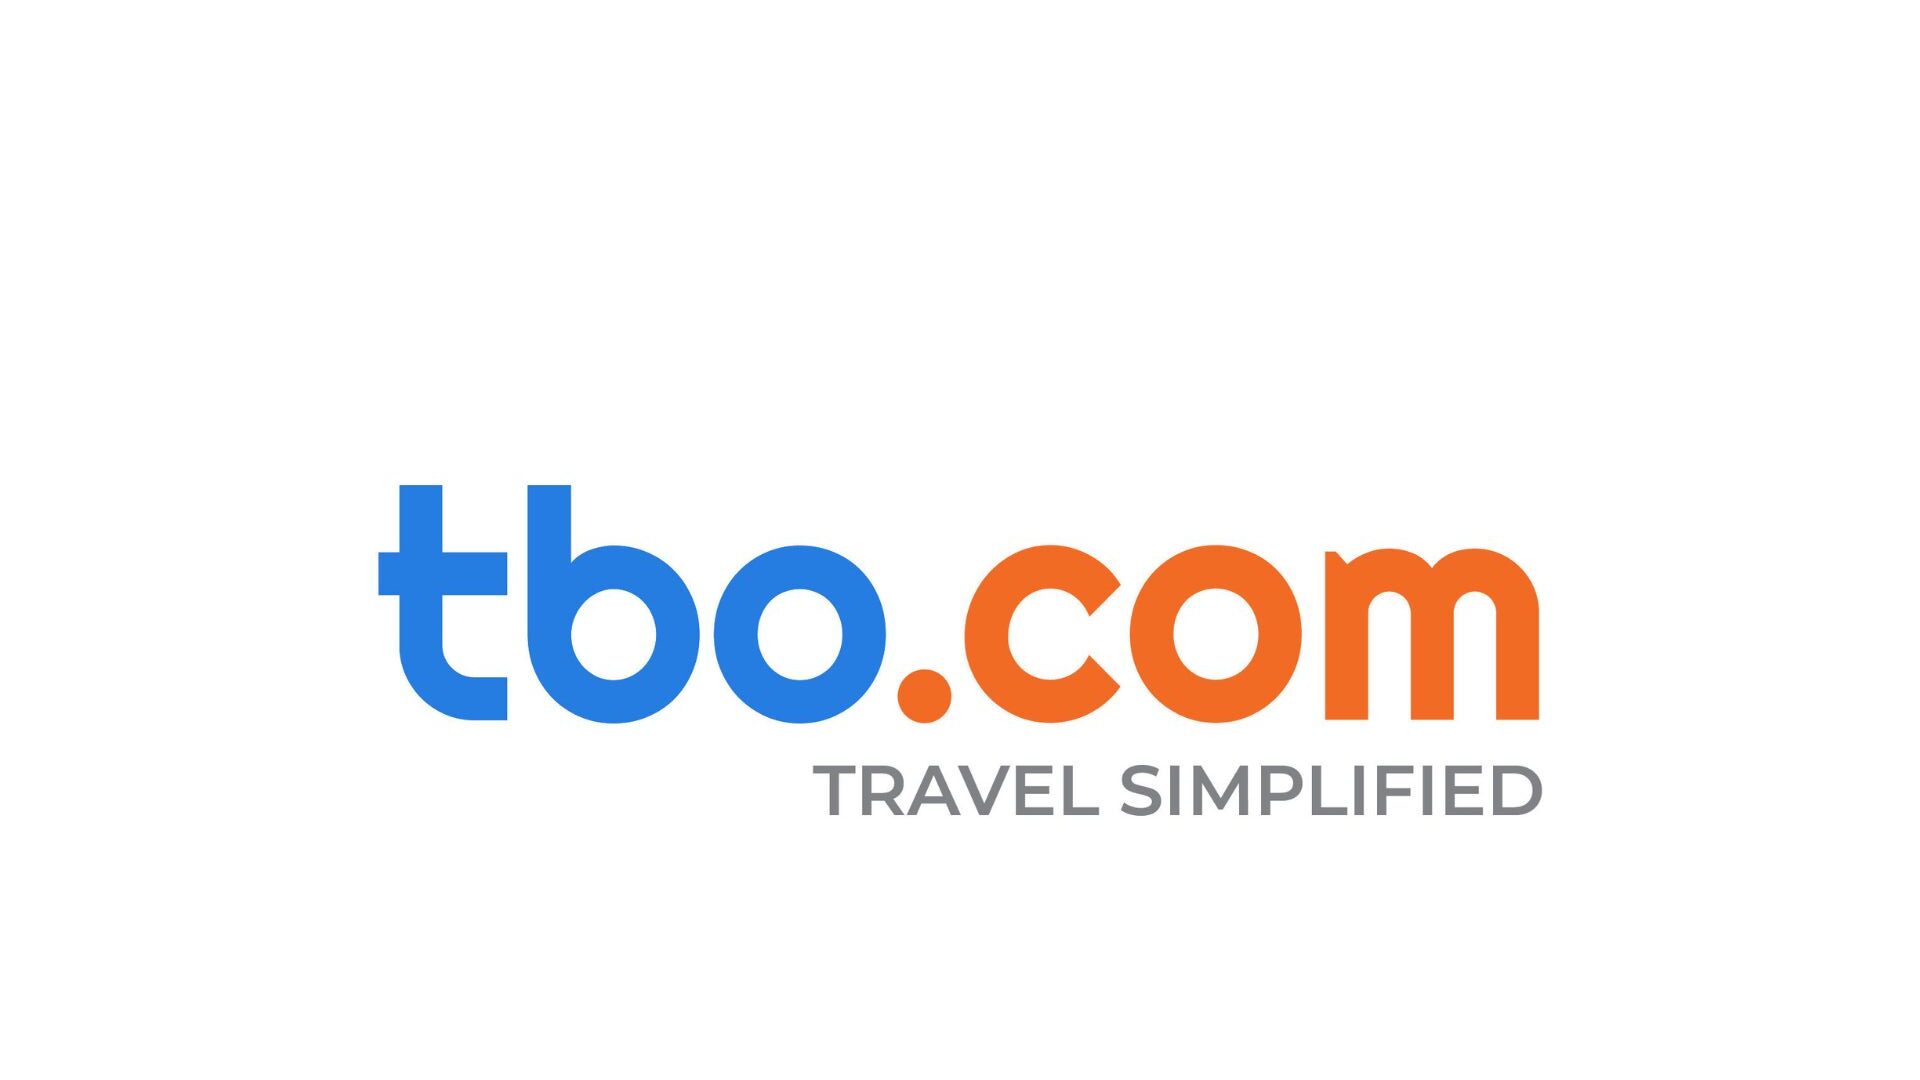 TBO.com strengthening its product portfolio, gears up for summer travel  season with enhanced offerings, ET TravelWorld